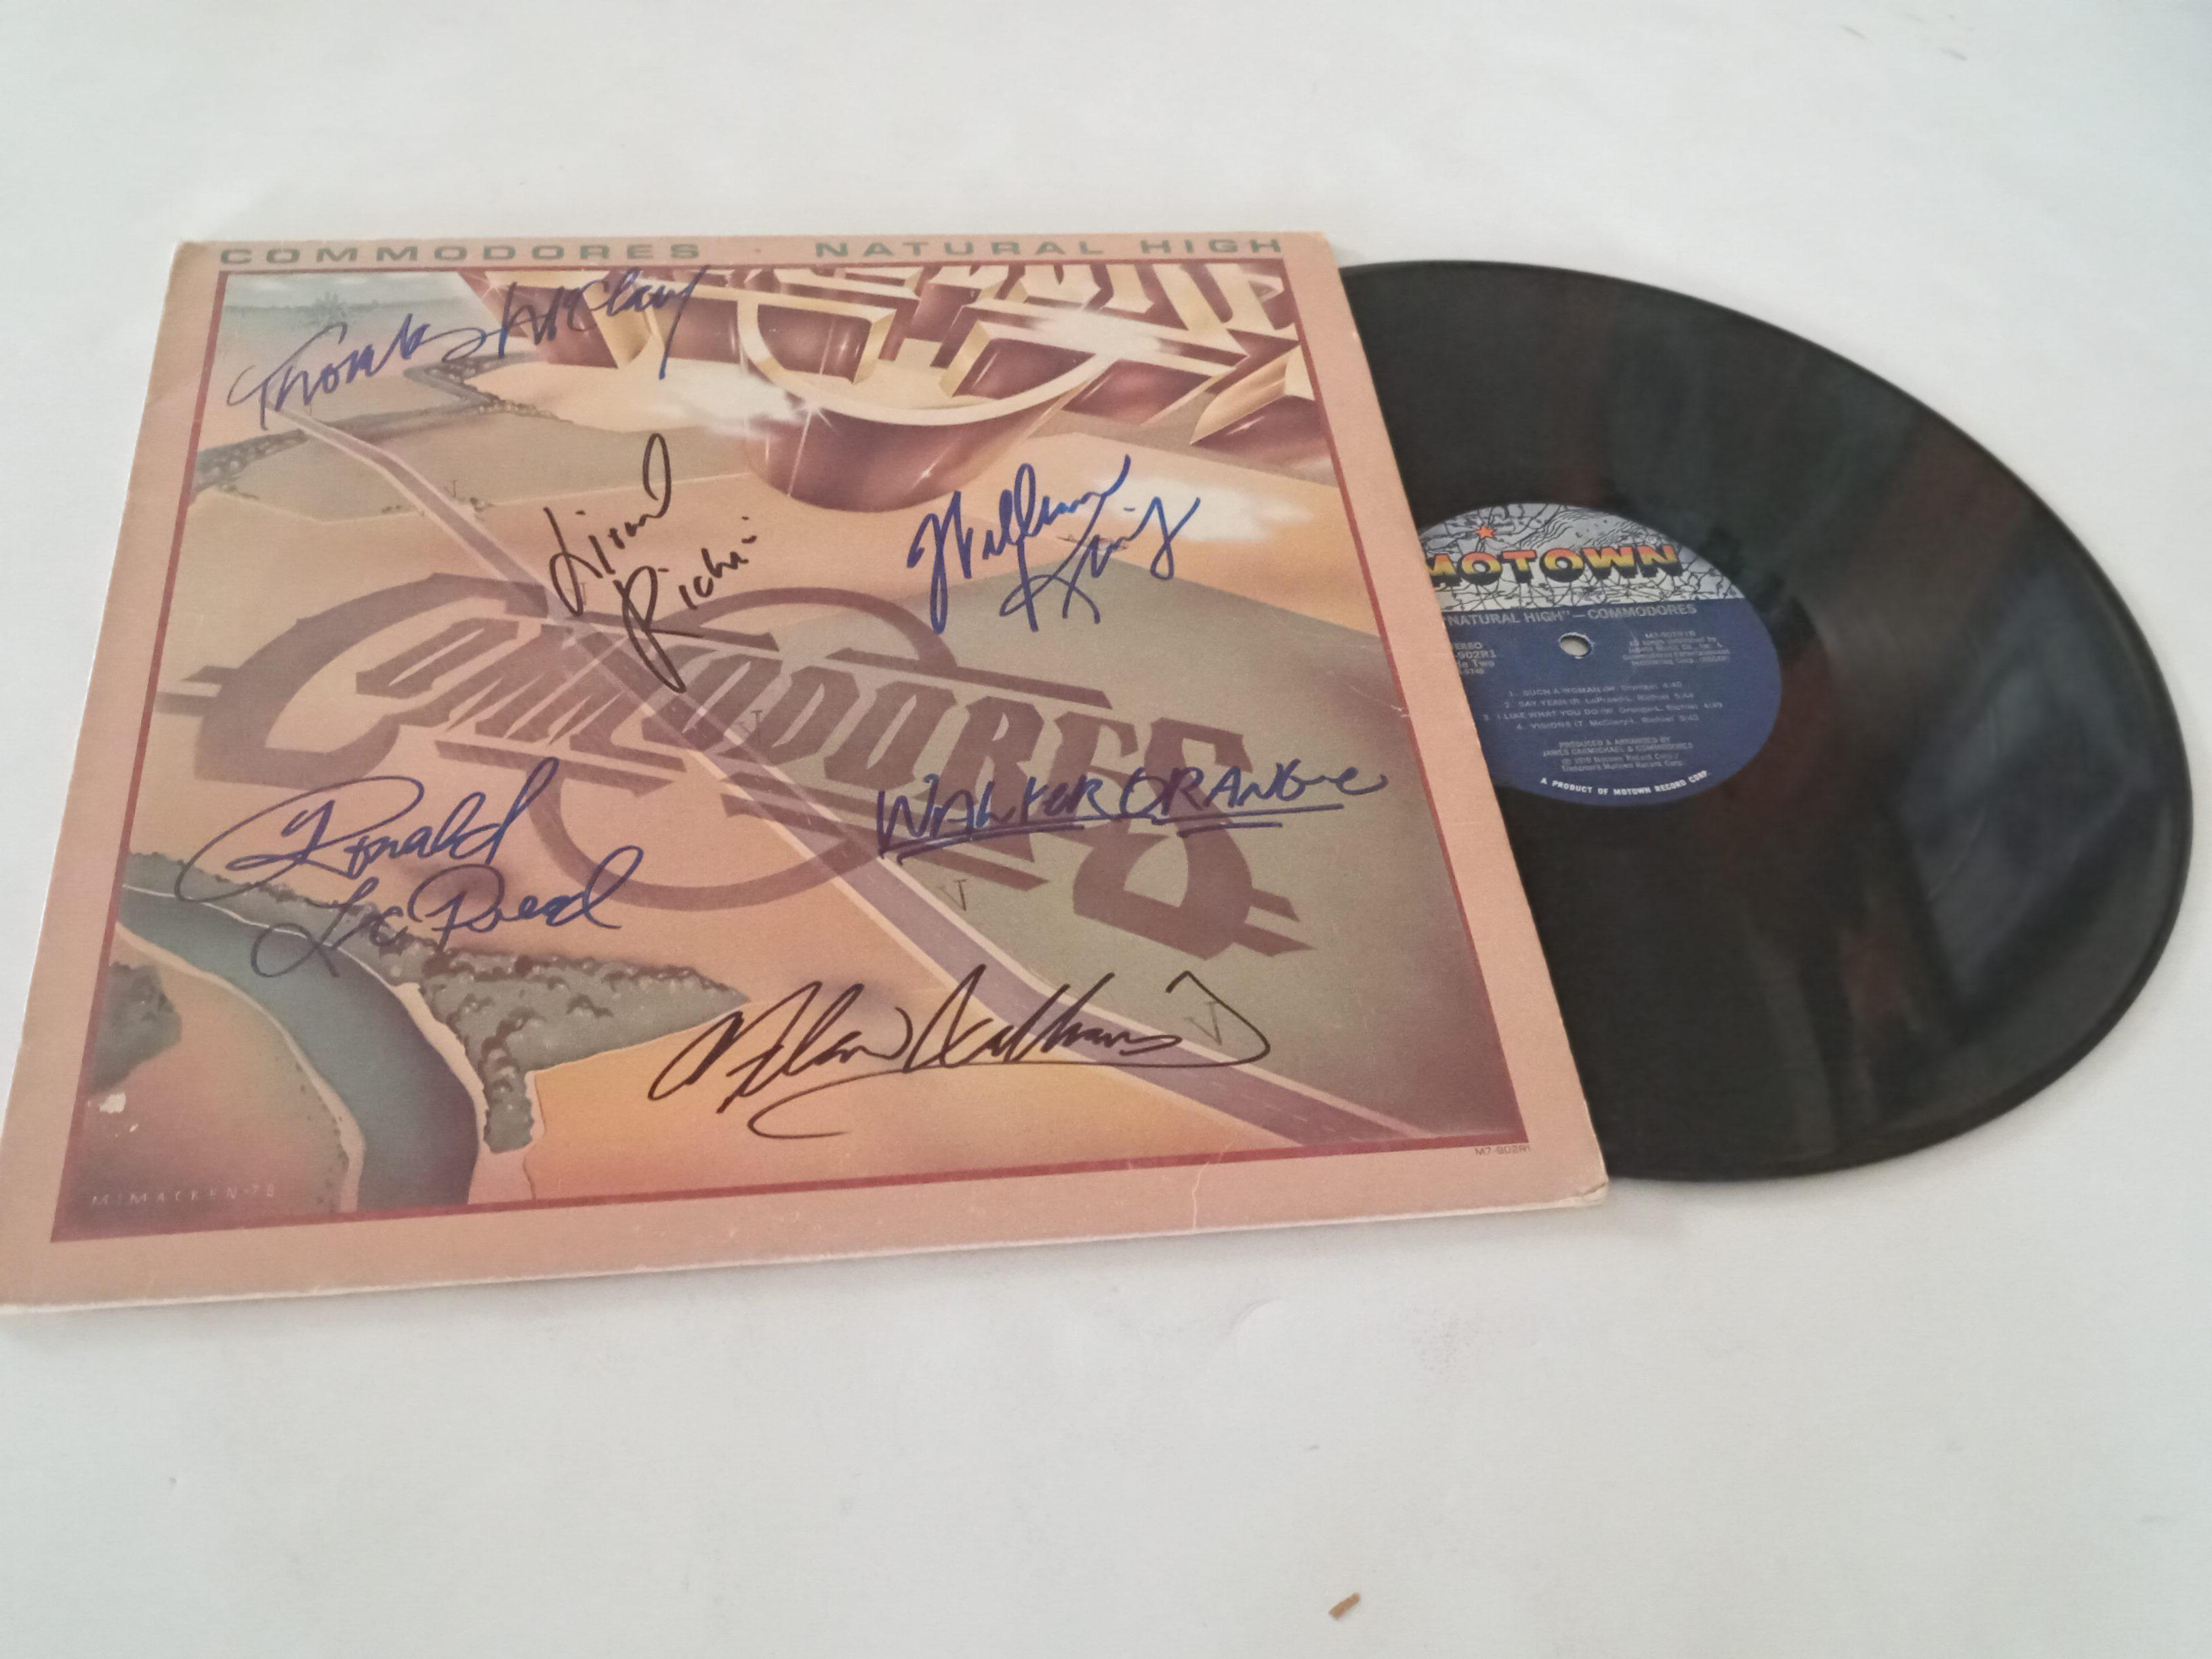 Lionel Richie and the Commodores 'Natural High' LP signed with proof